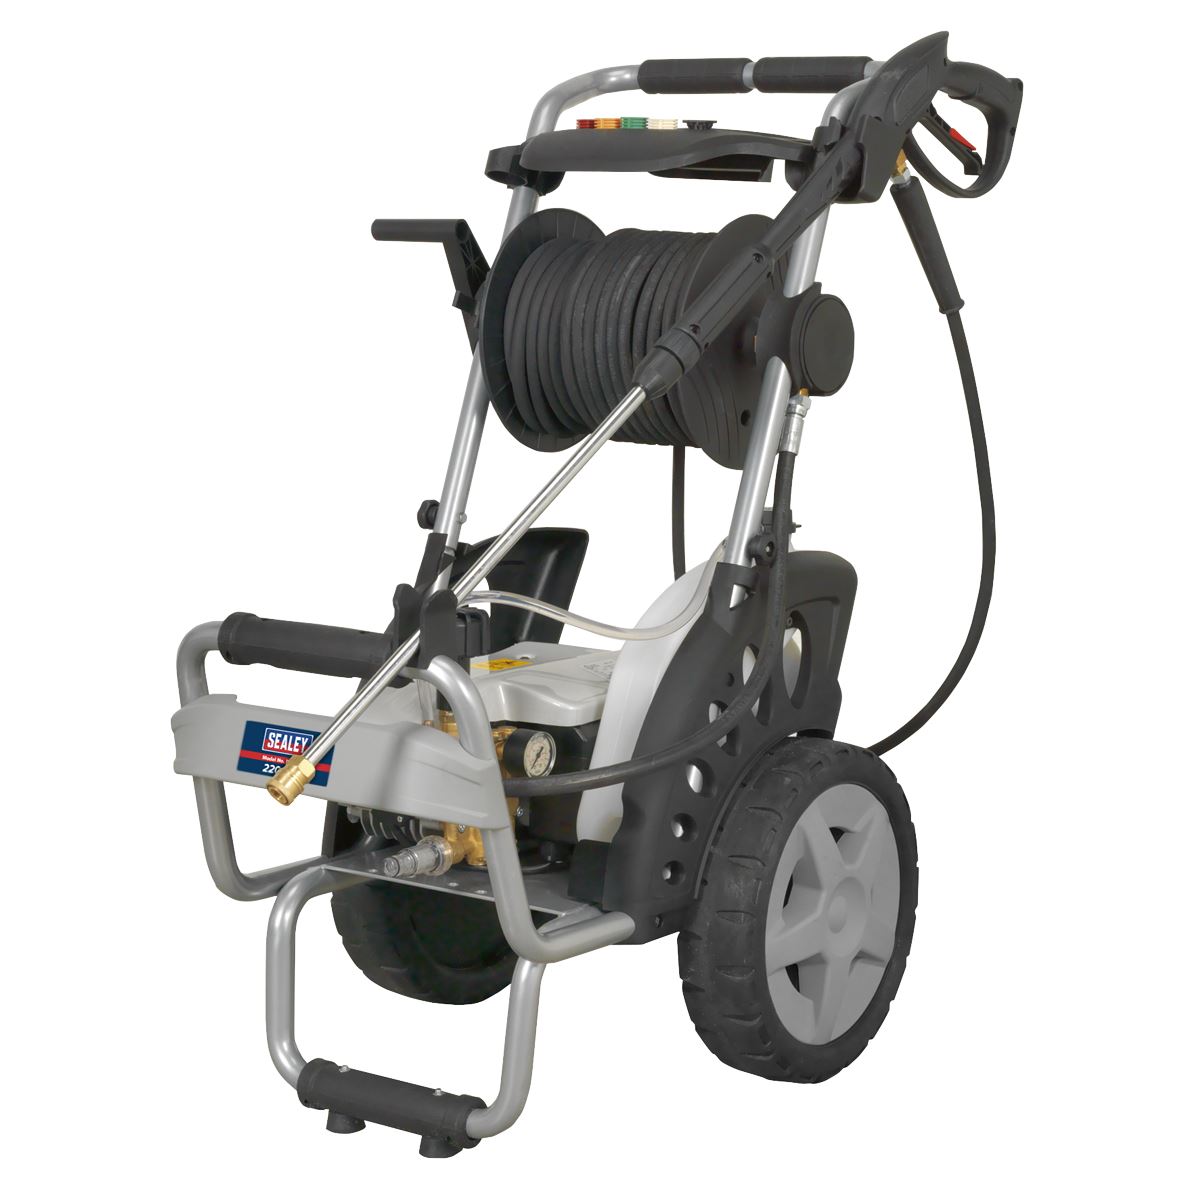 Sealey Professional Pressure Washer 150bar with TSS & Nozzle Set 230V